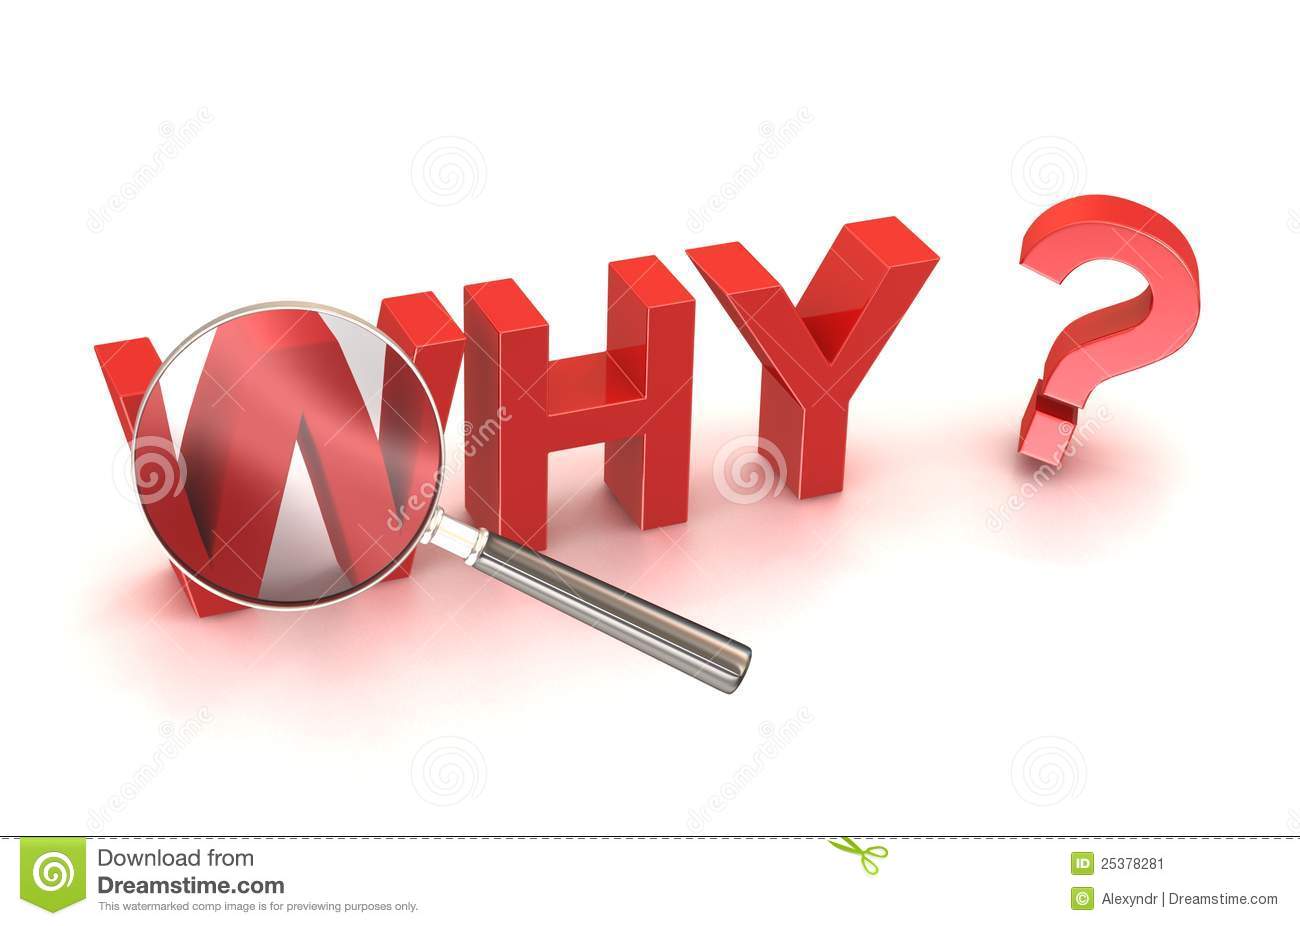 Stock Photo  Why Reason Cause Source Search Button Stock Image   Image